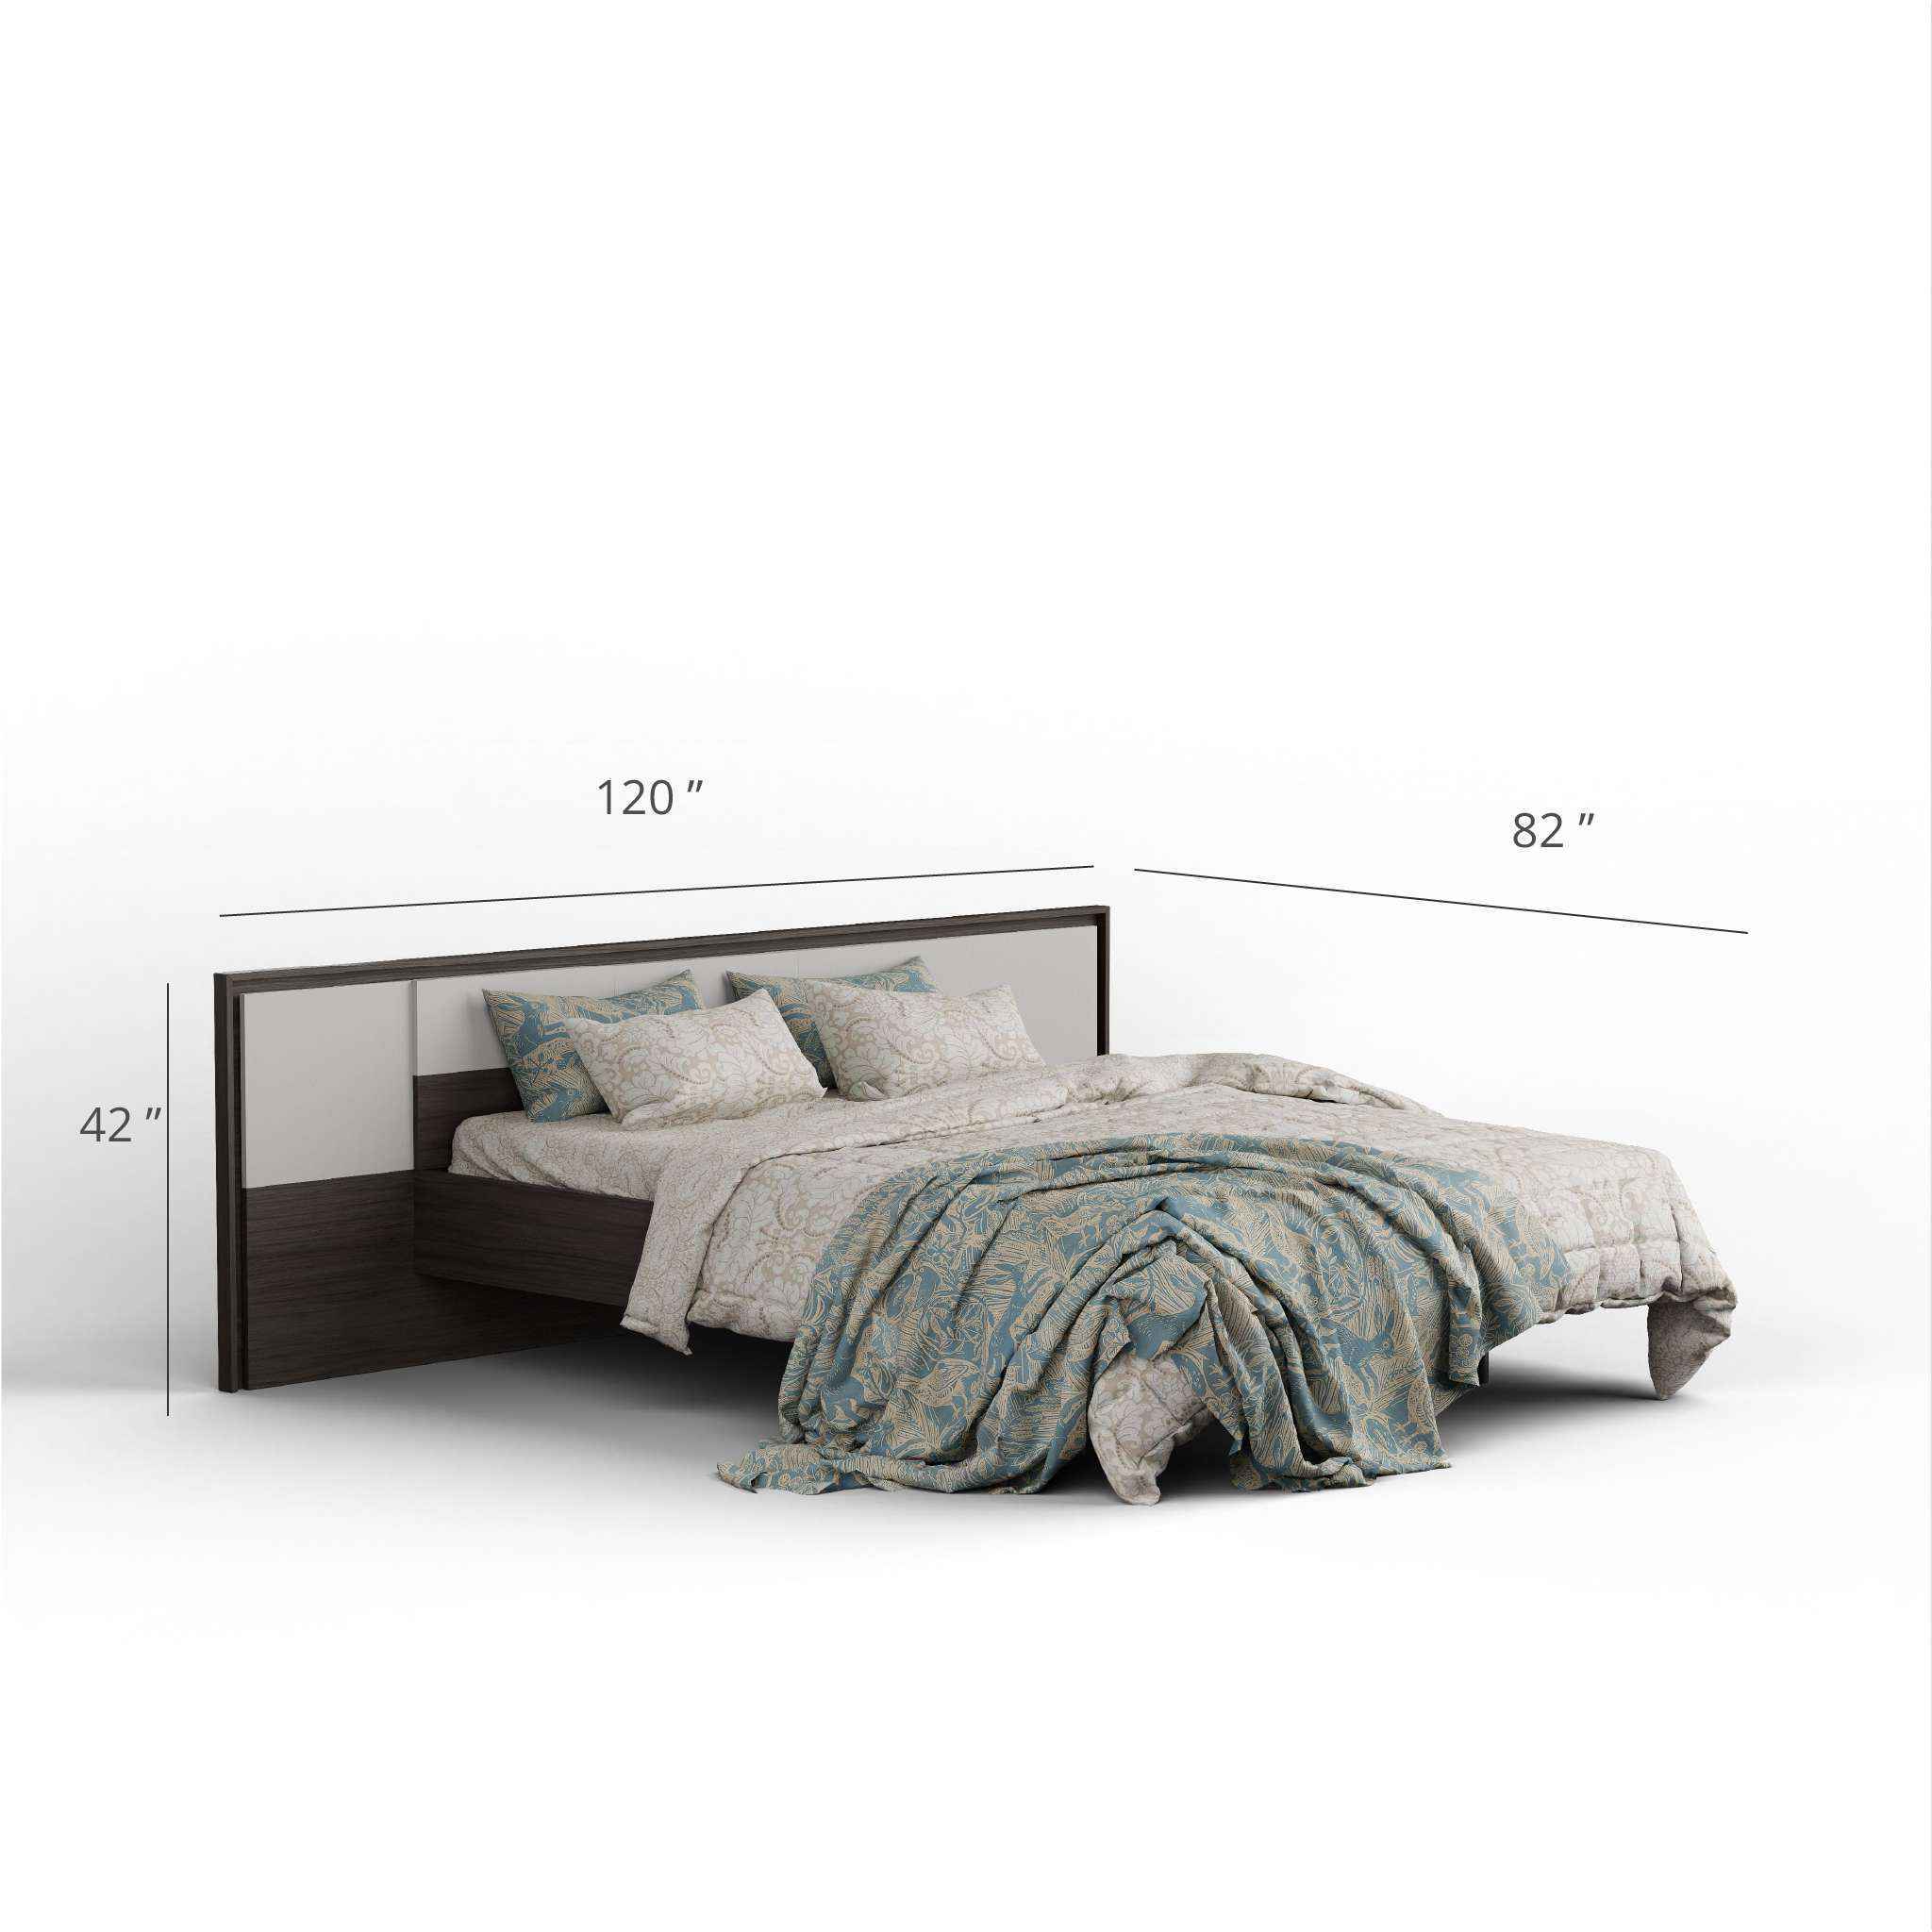 Miho Vernon King Size Bed